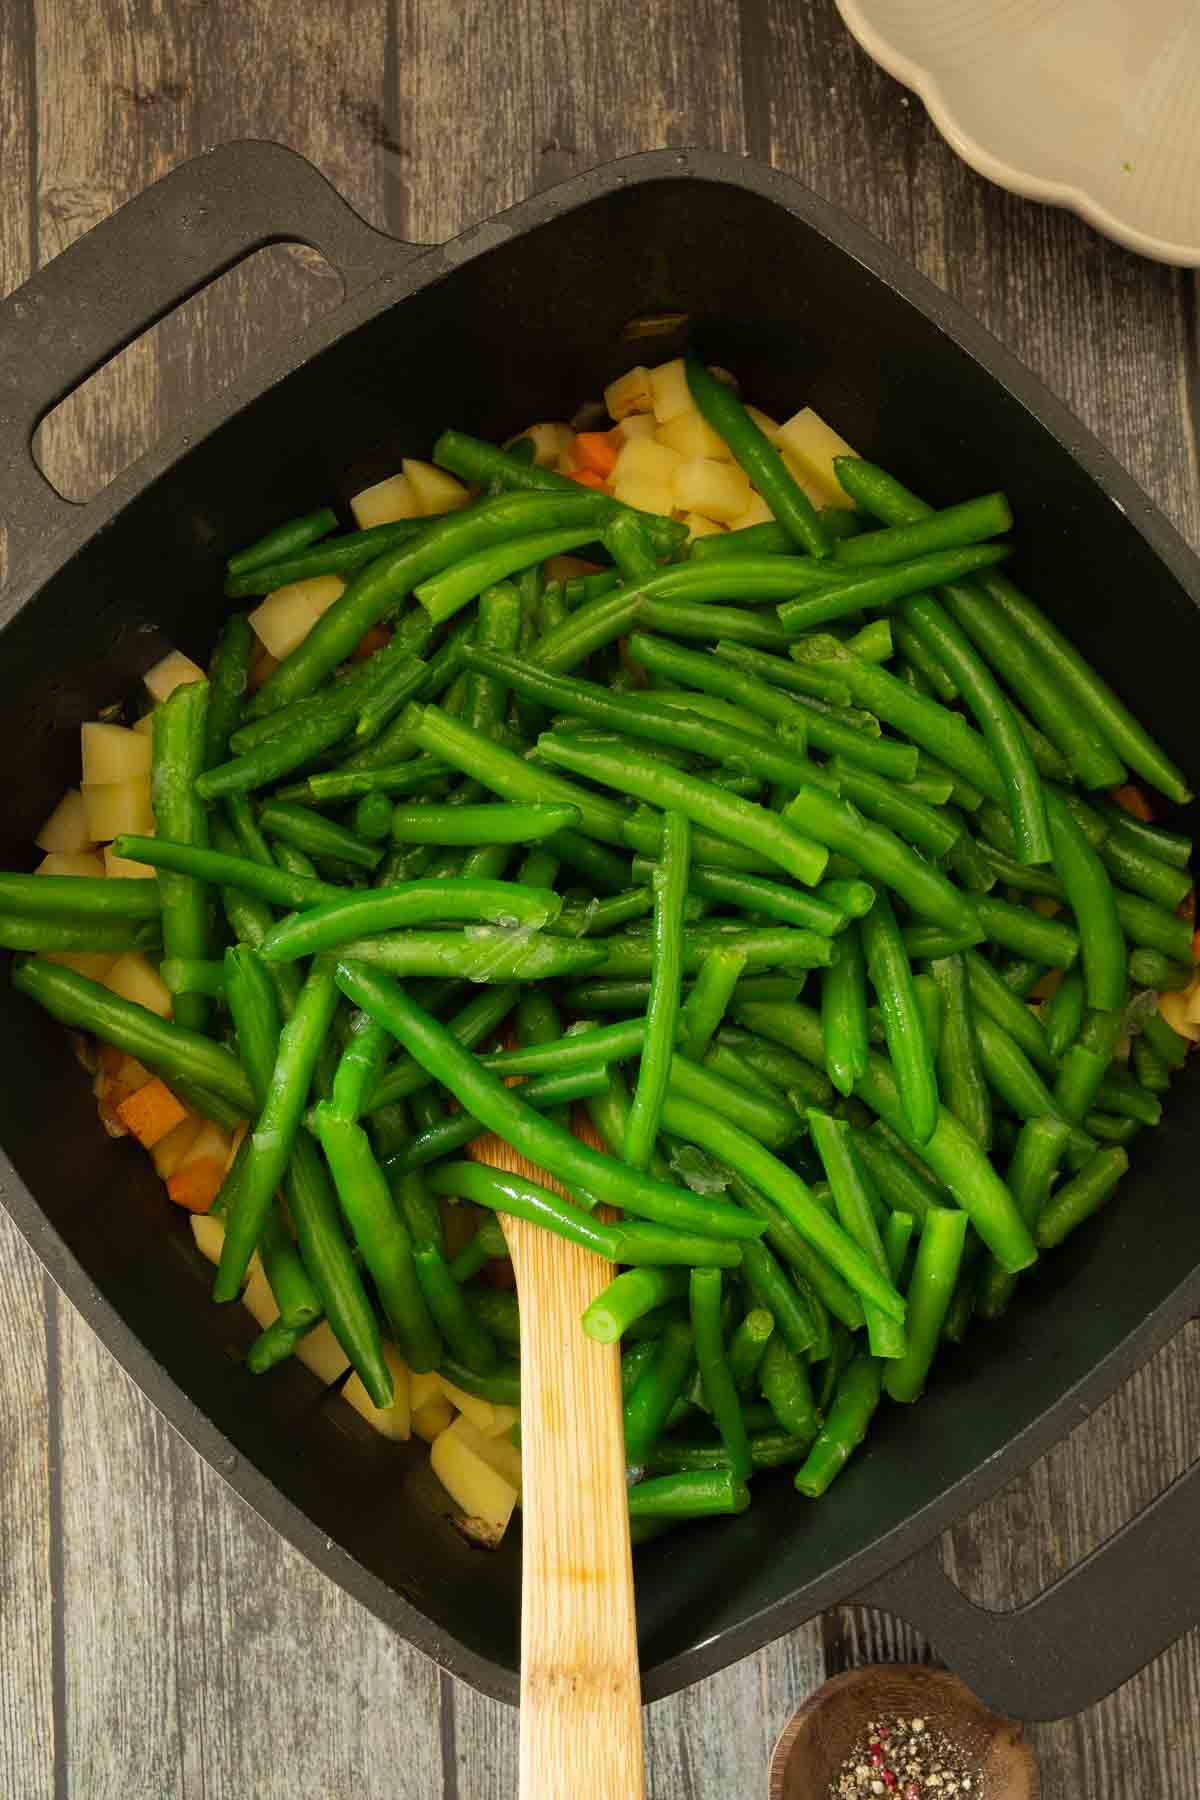 Long, fresh green beans being added into pot full of vegetables and water or stock.